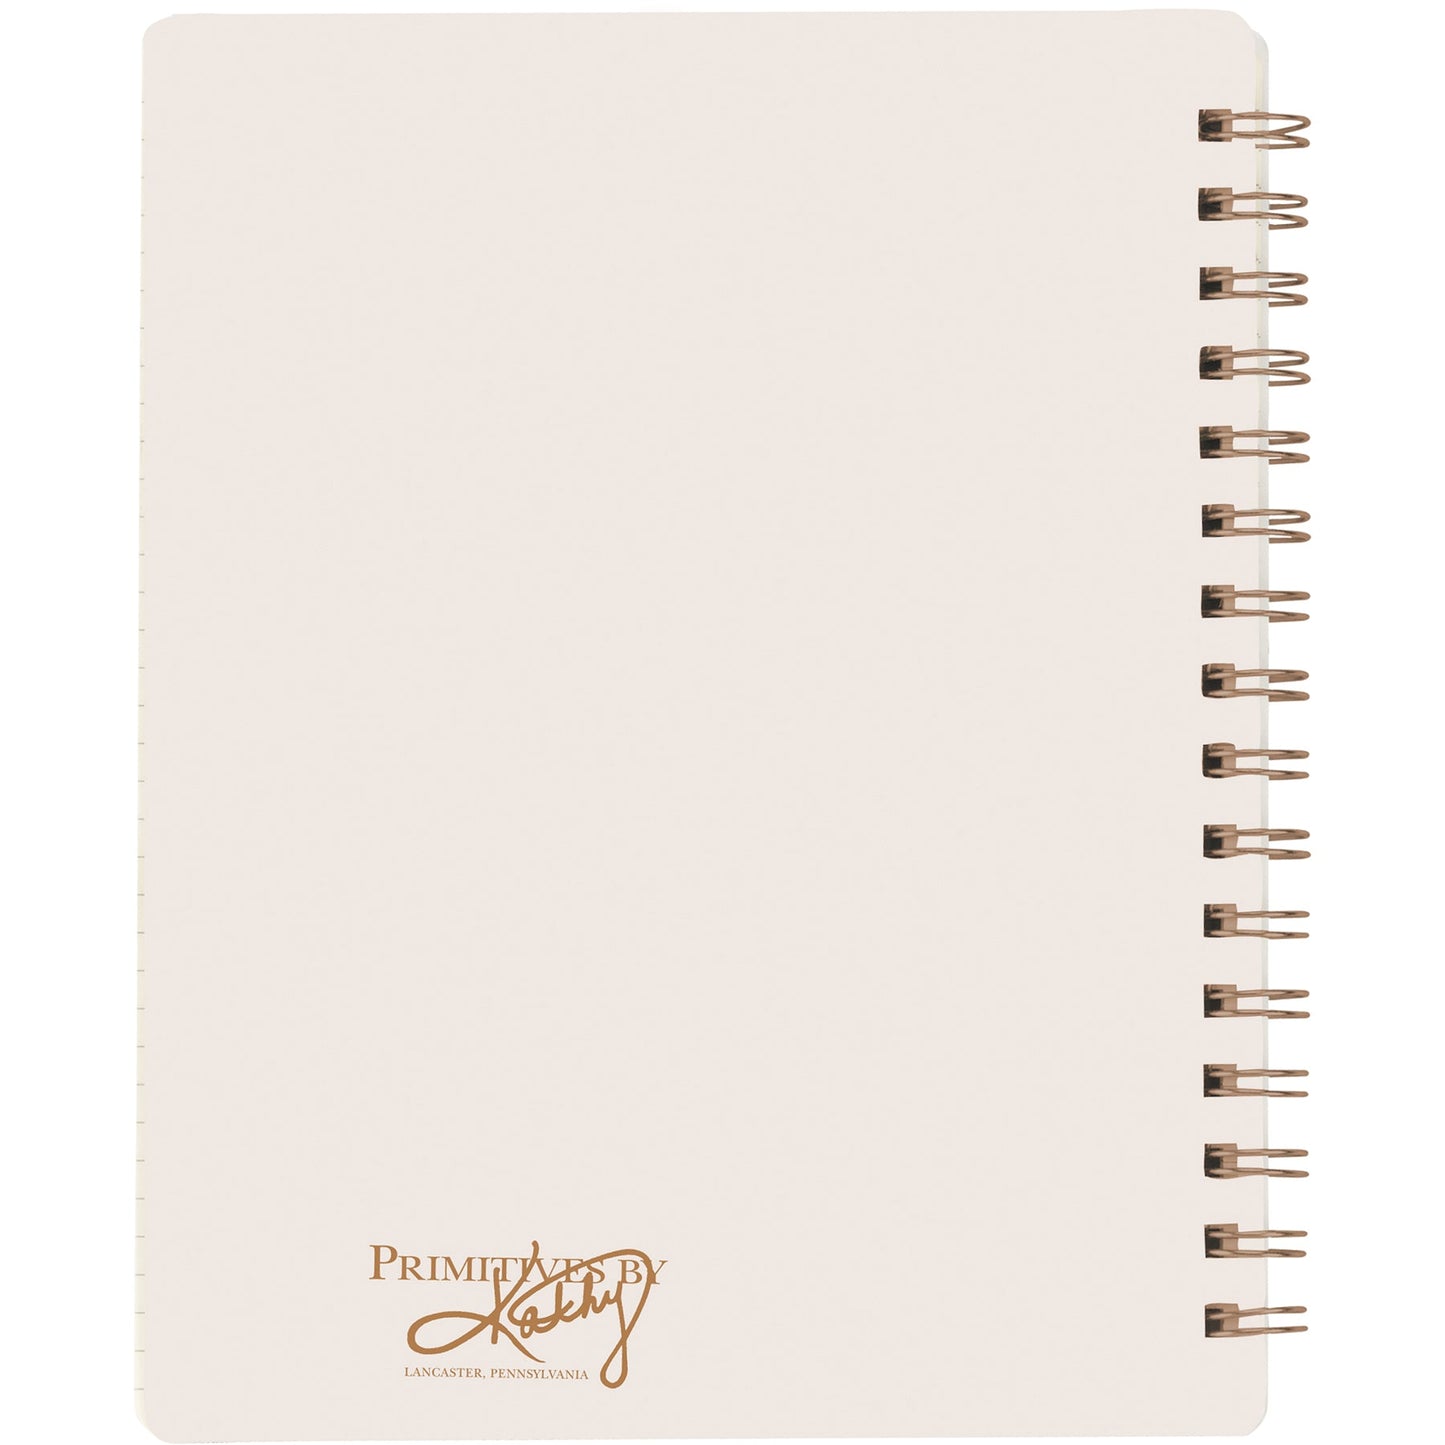 Positive Reminders - I Am Amazing Spiral Notebook | 5.75" x 7.50" | 120 Lined Pages